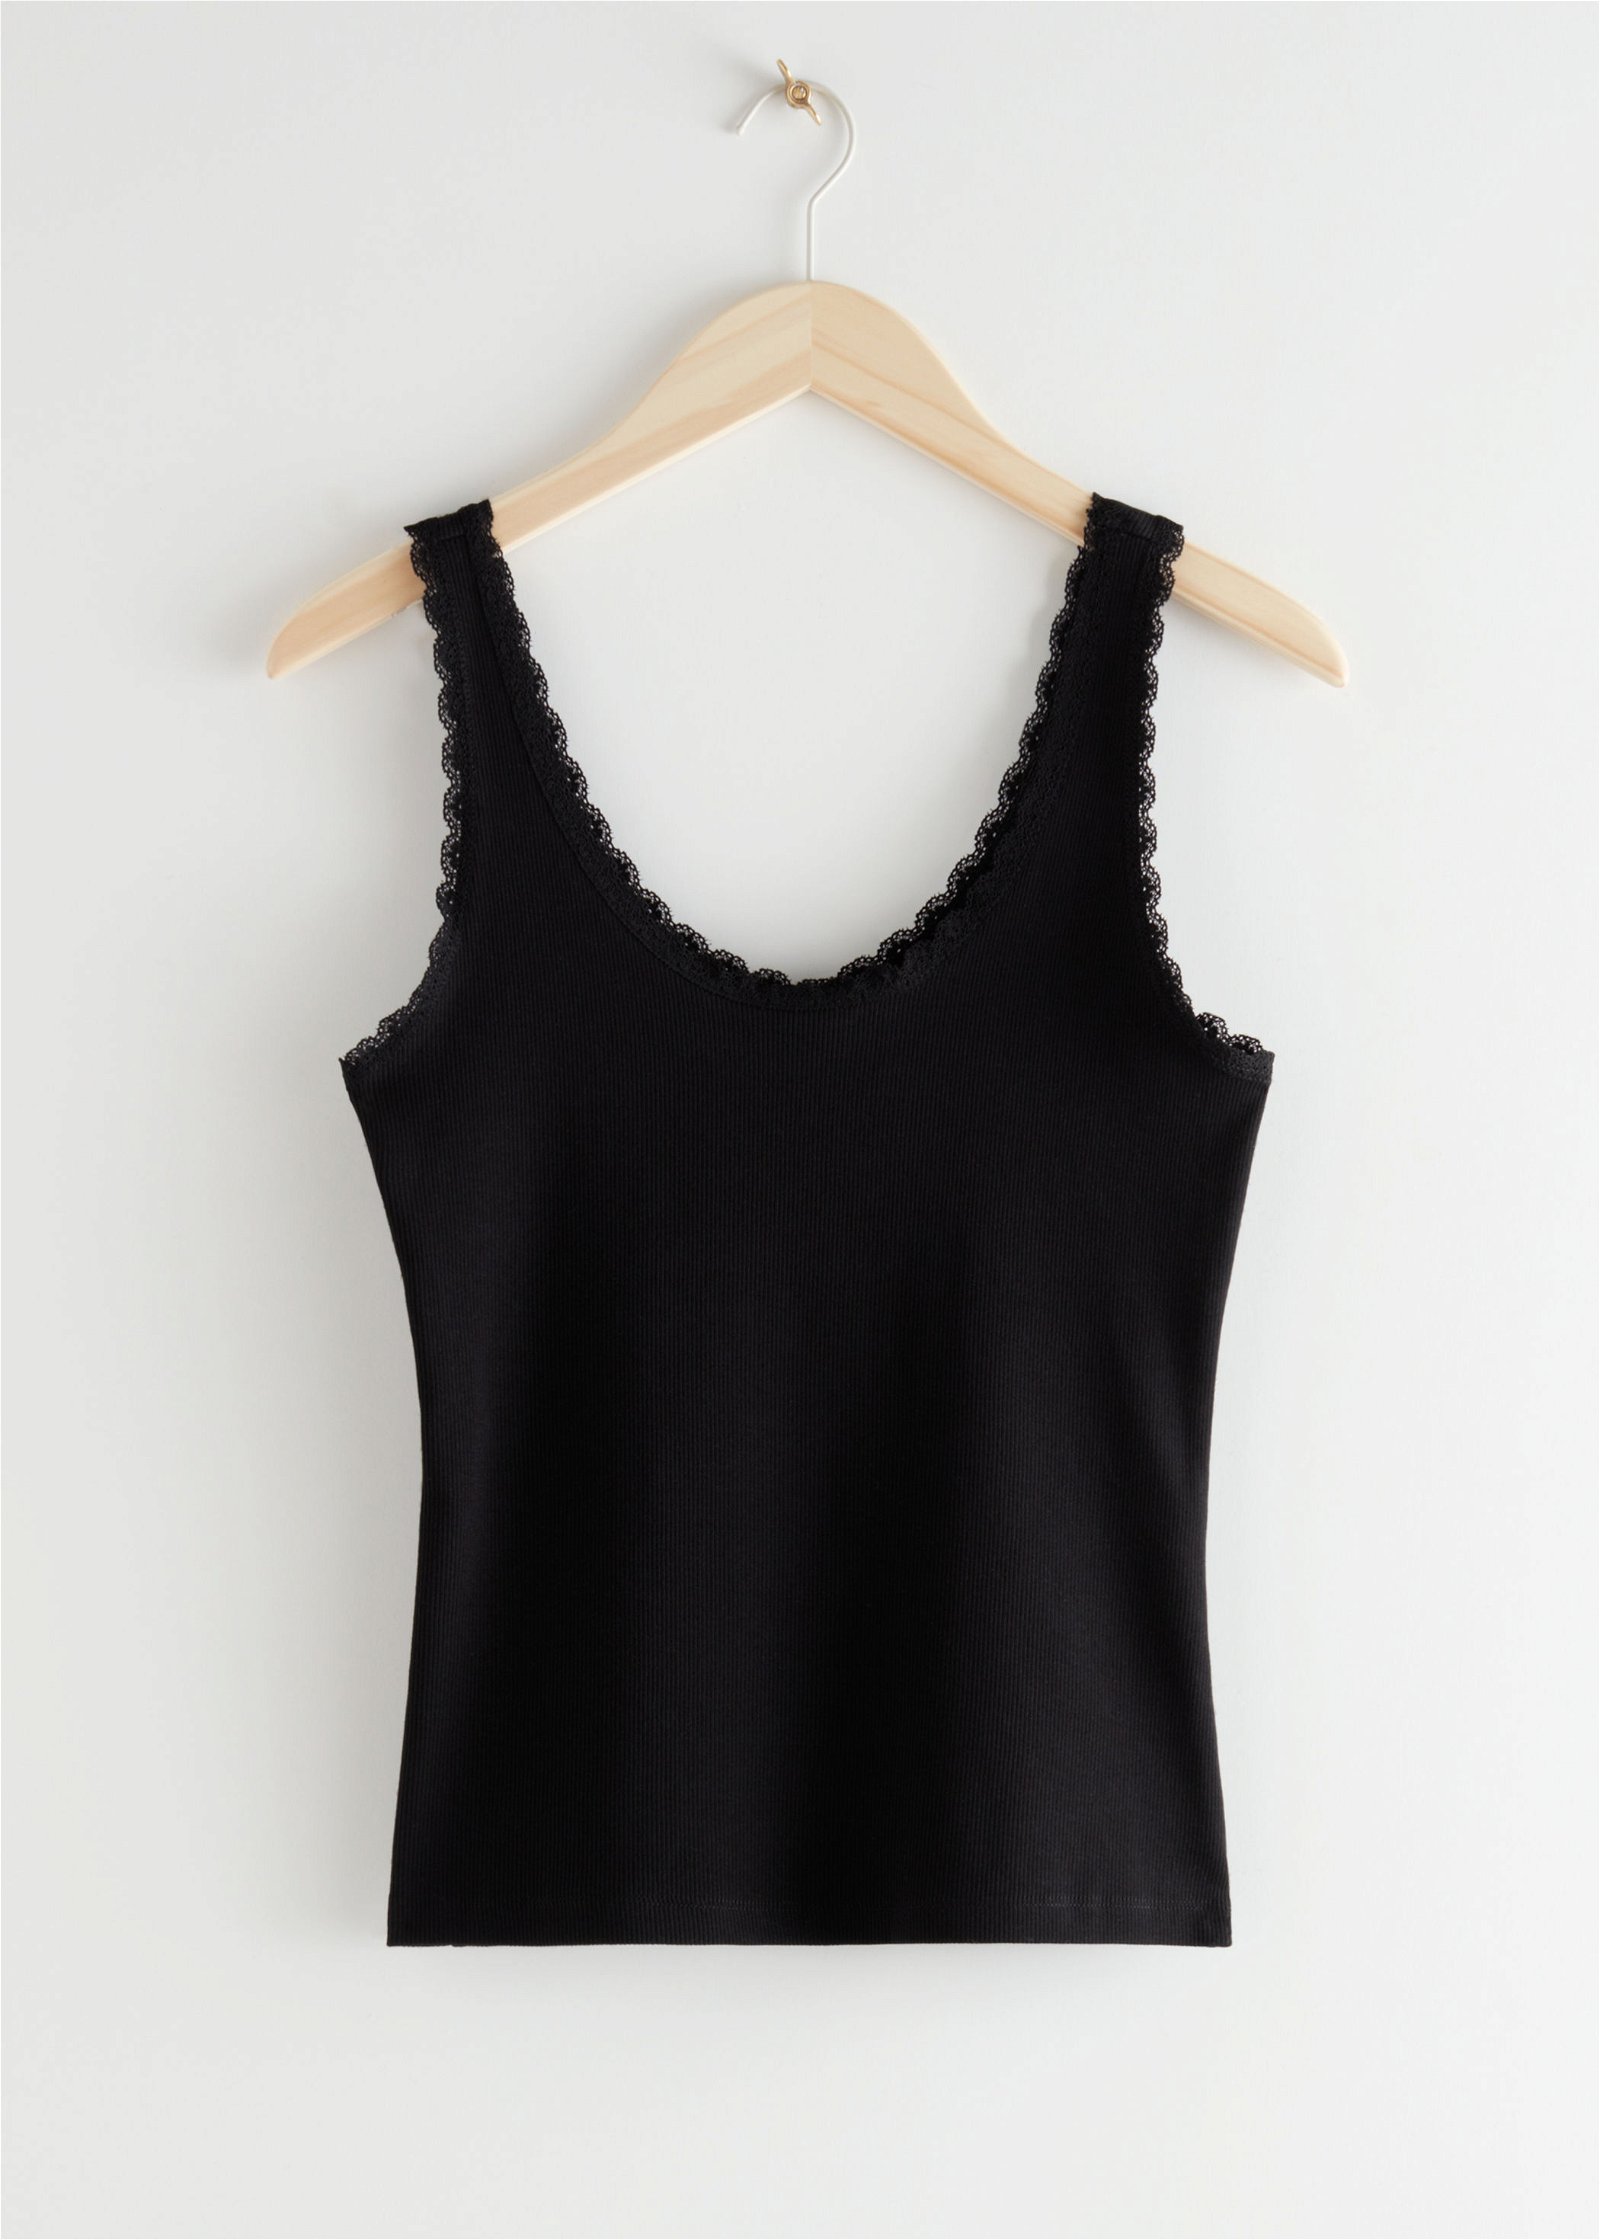 Lace Trim Ribbed Tank Top  Lace trim tank top, Ribbed tank tops